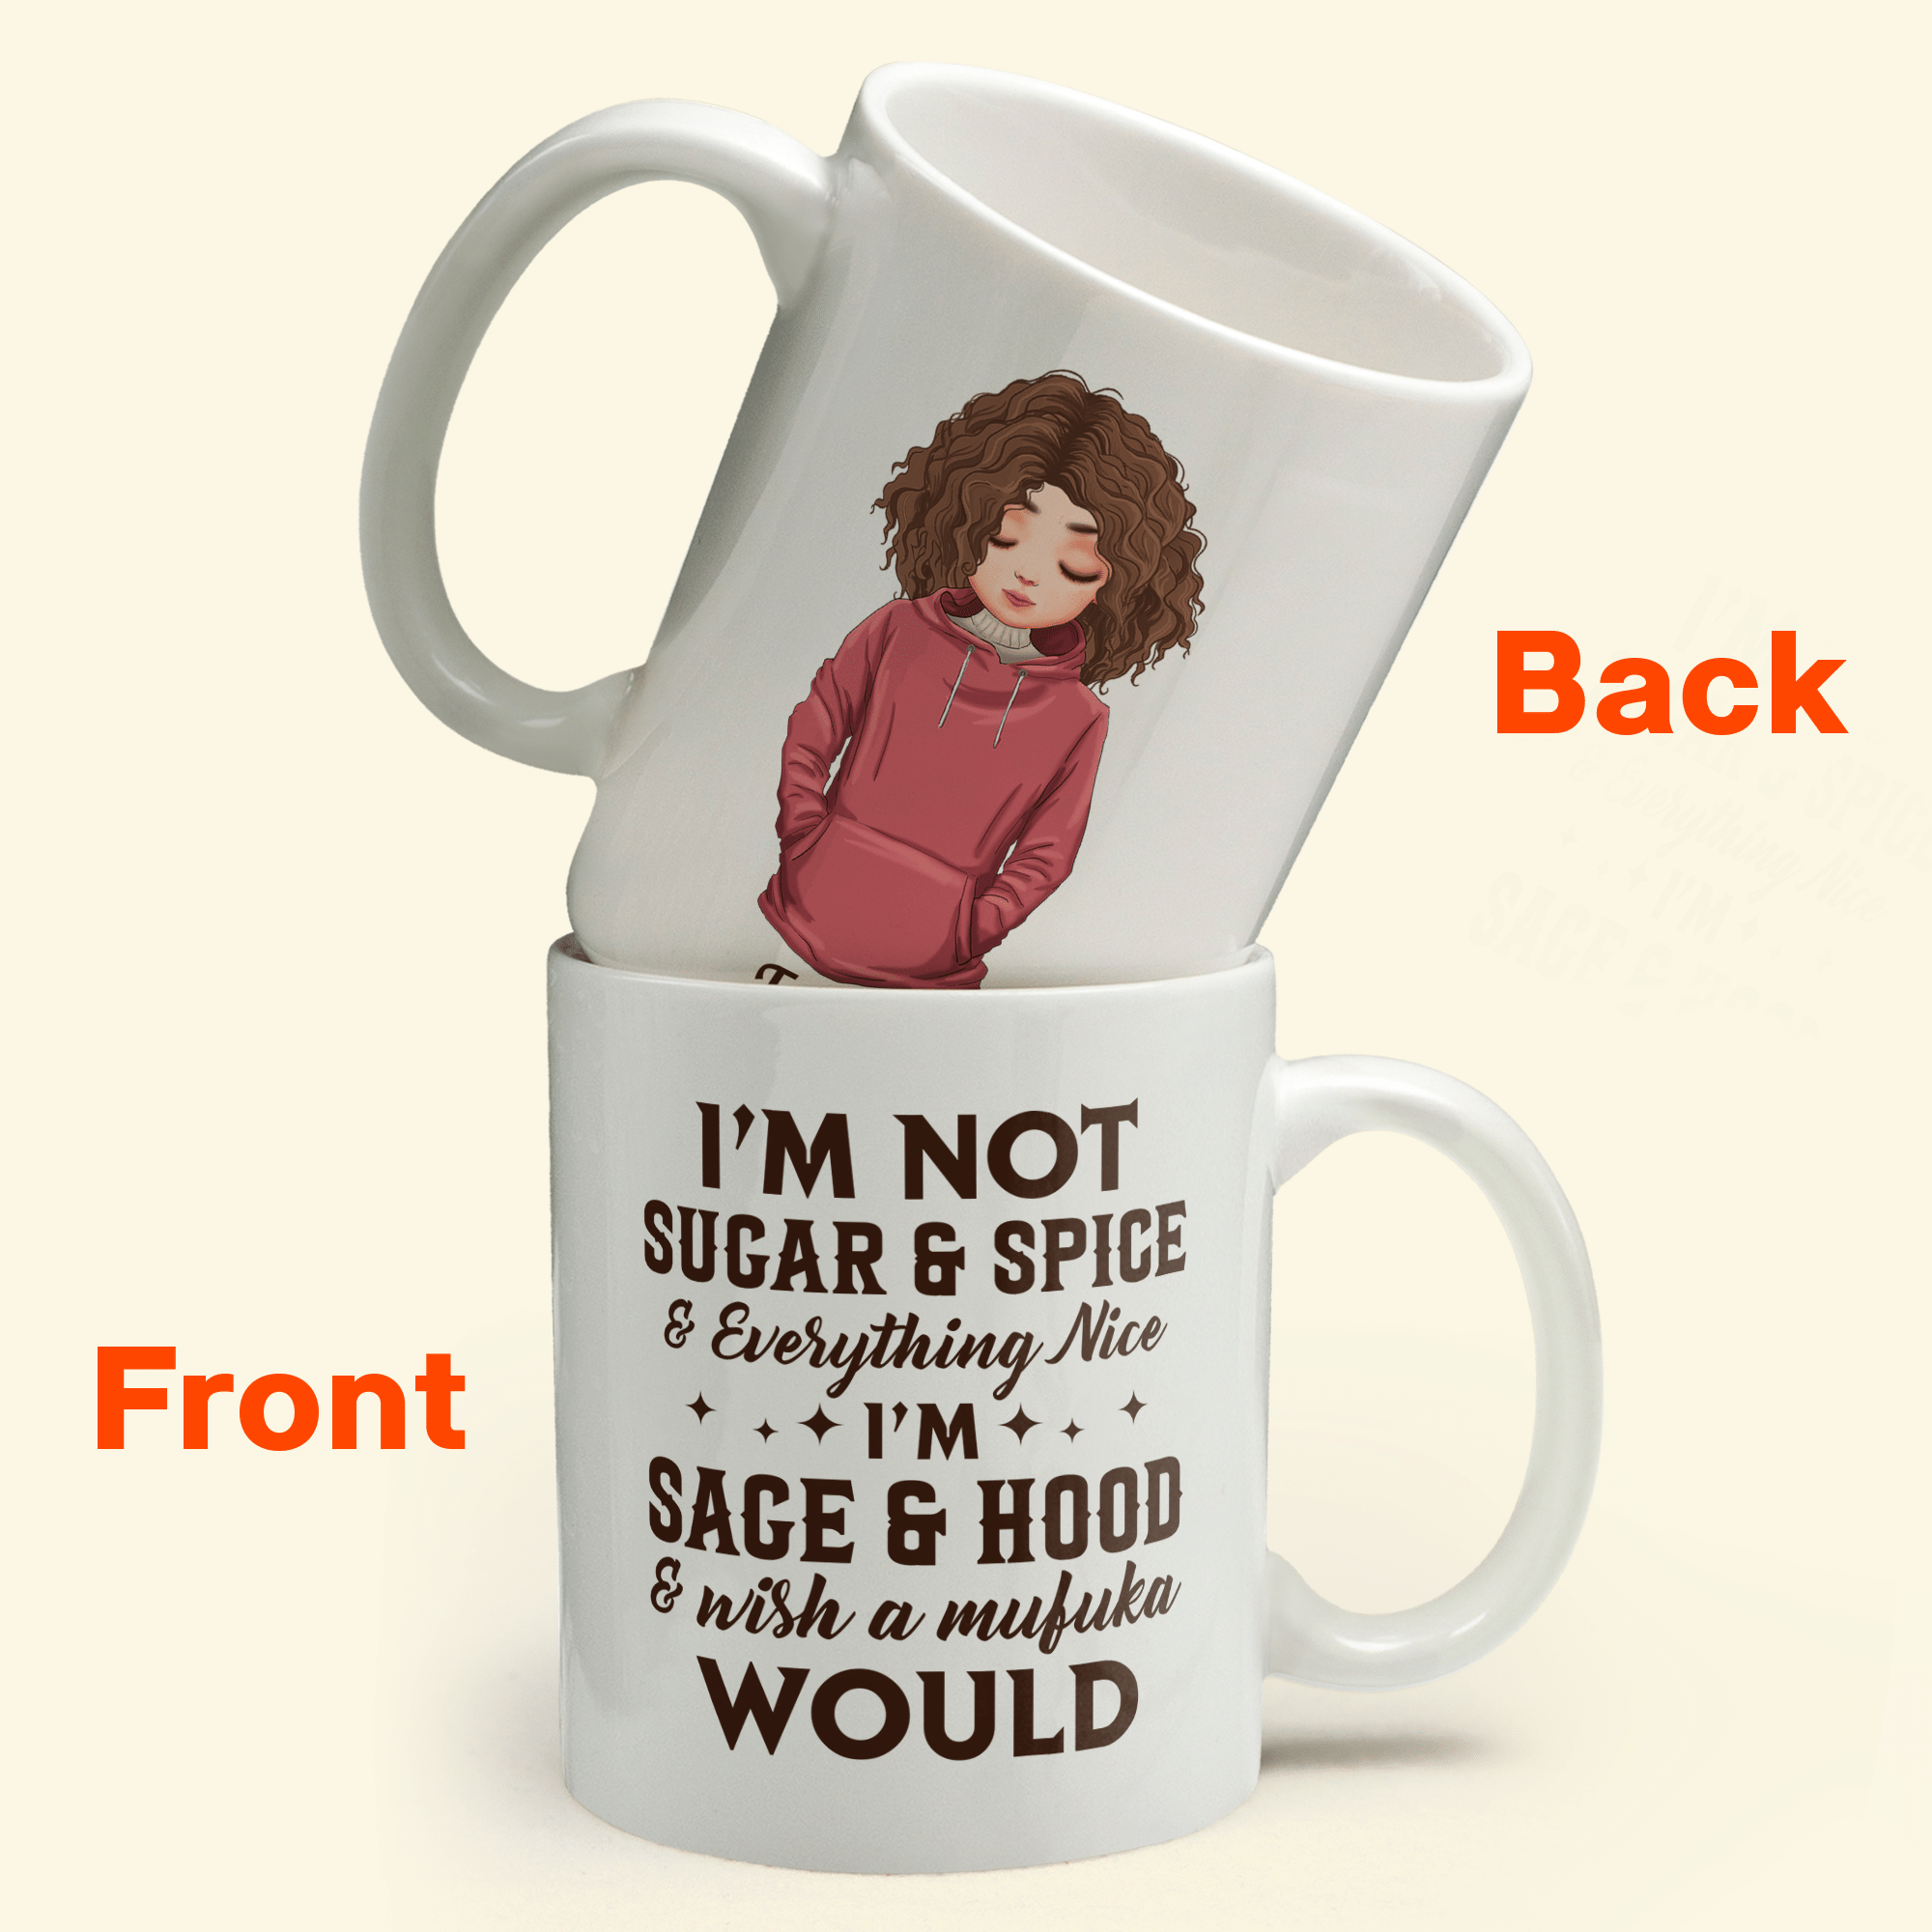 I'm Not Sugar & Spice - Personalized Mug - Birthday Gift For Yourself, Friends And Family